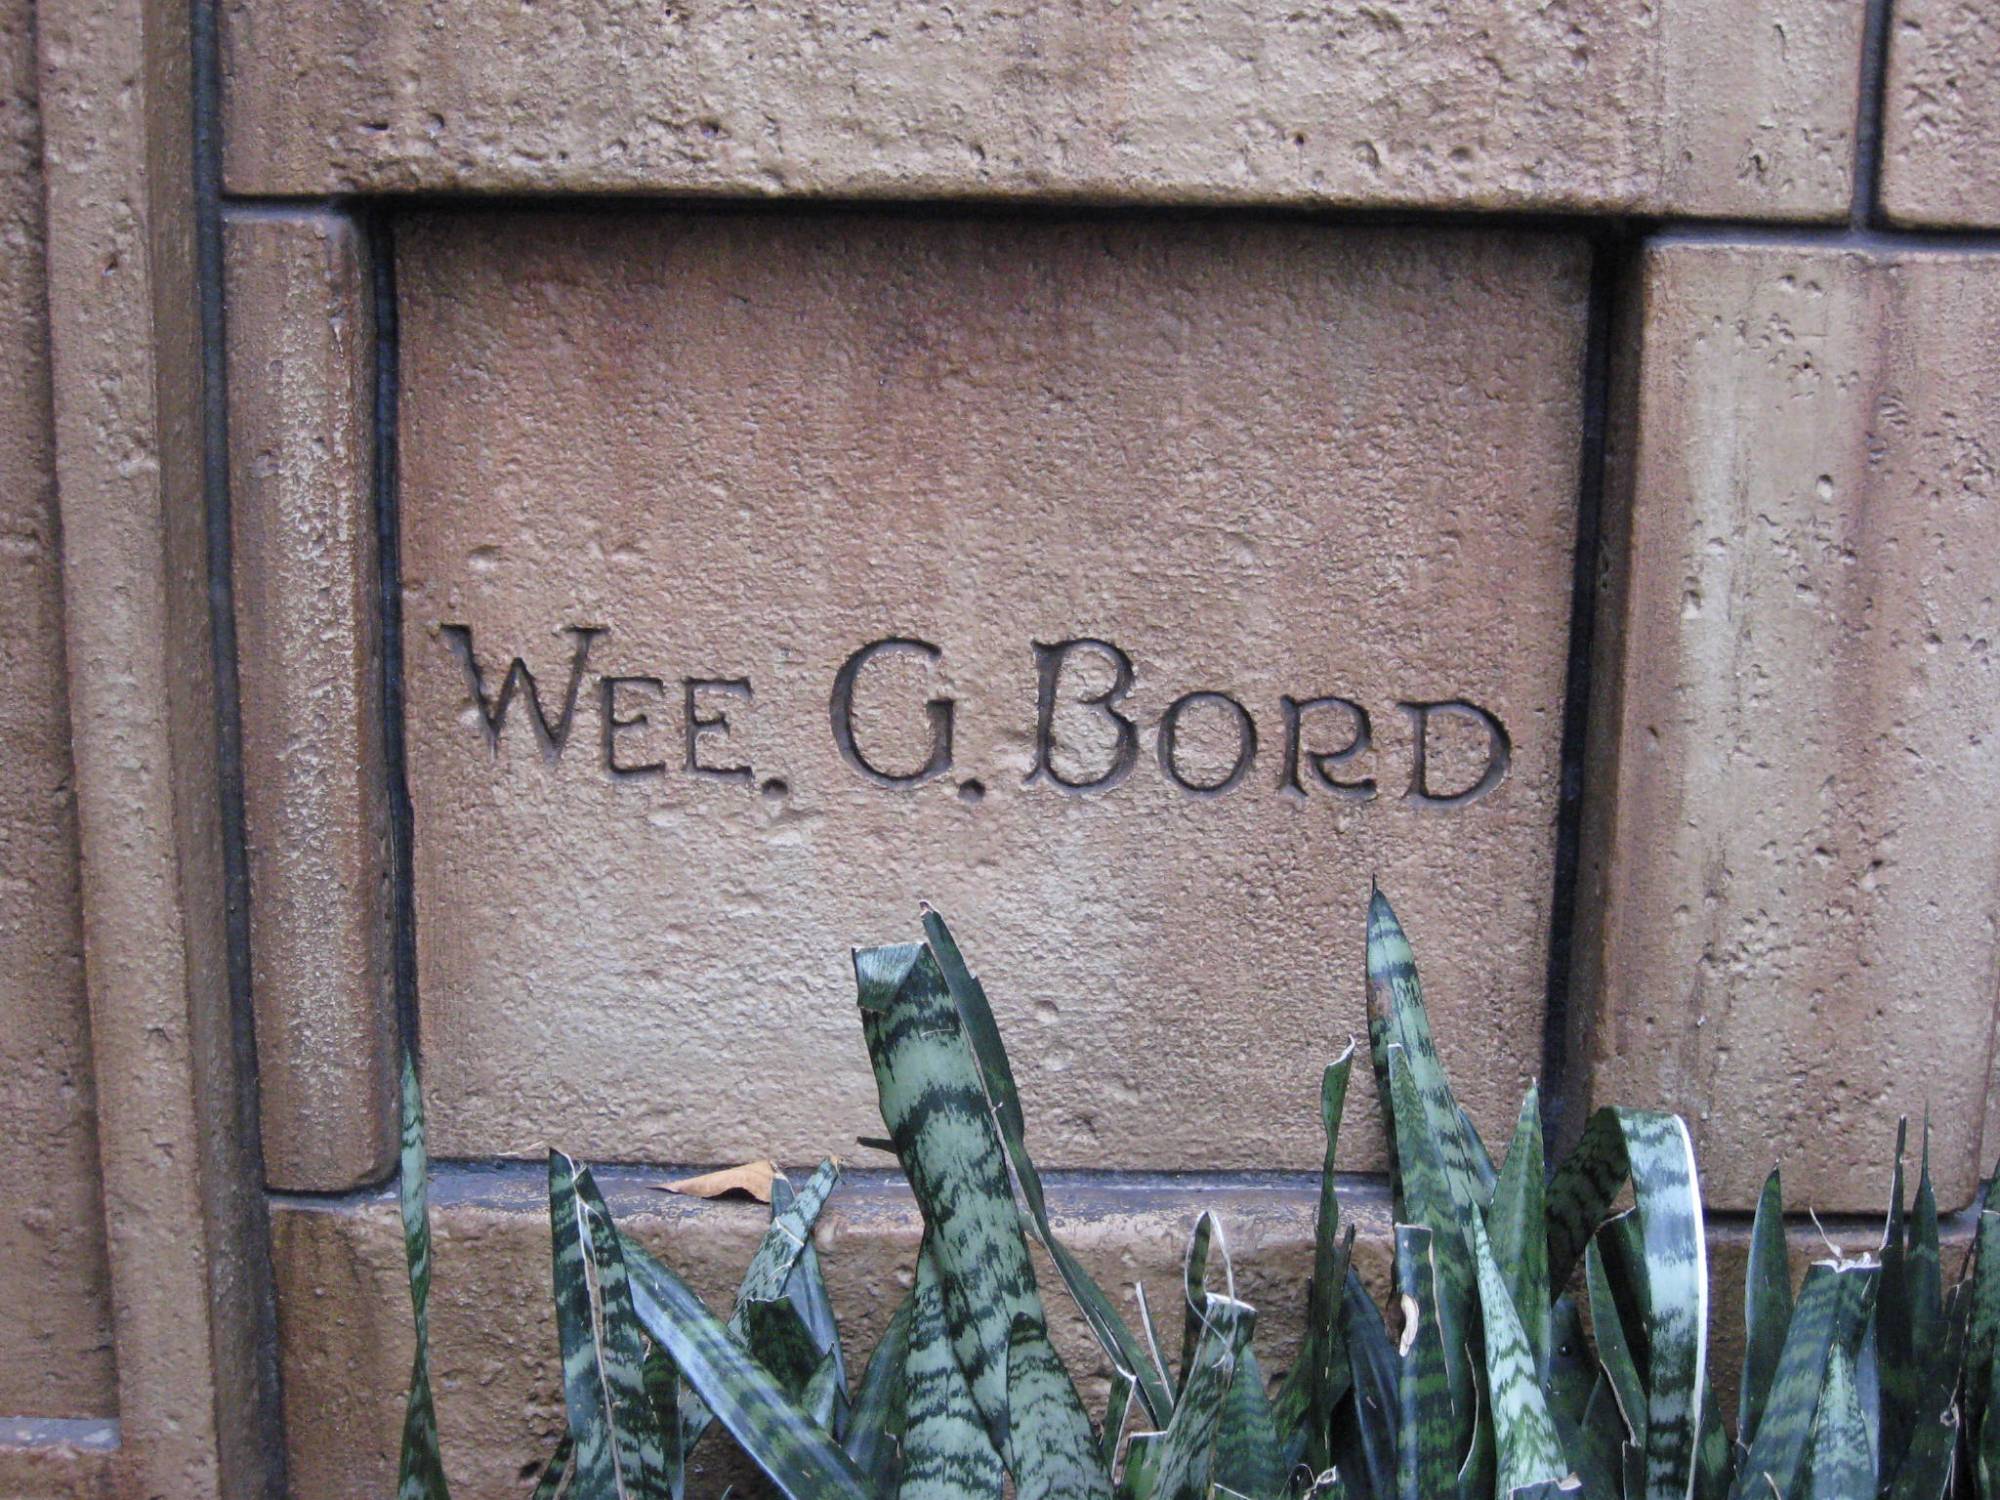 Haunted Mansion - Wee G Bord Crypt